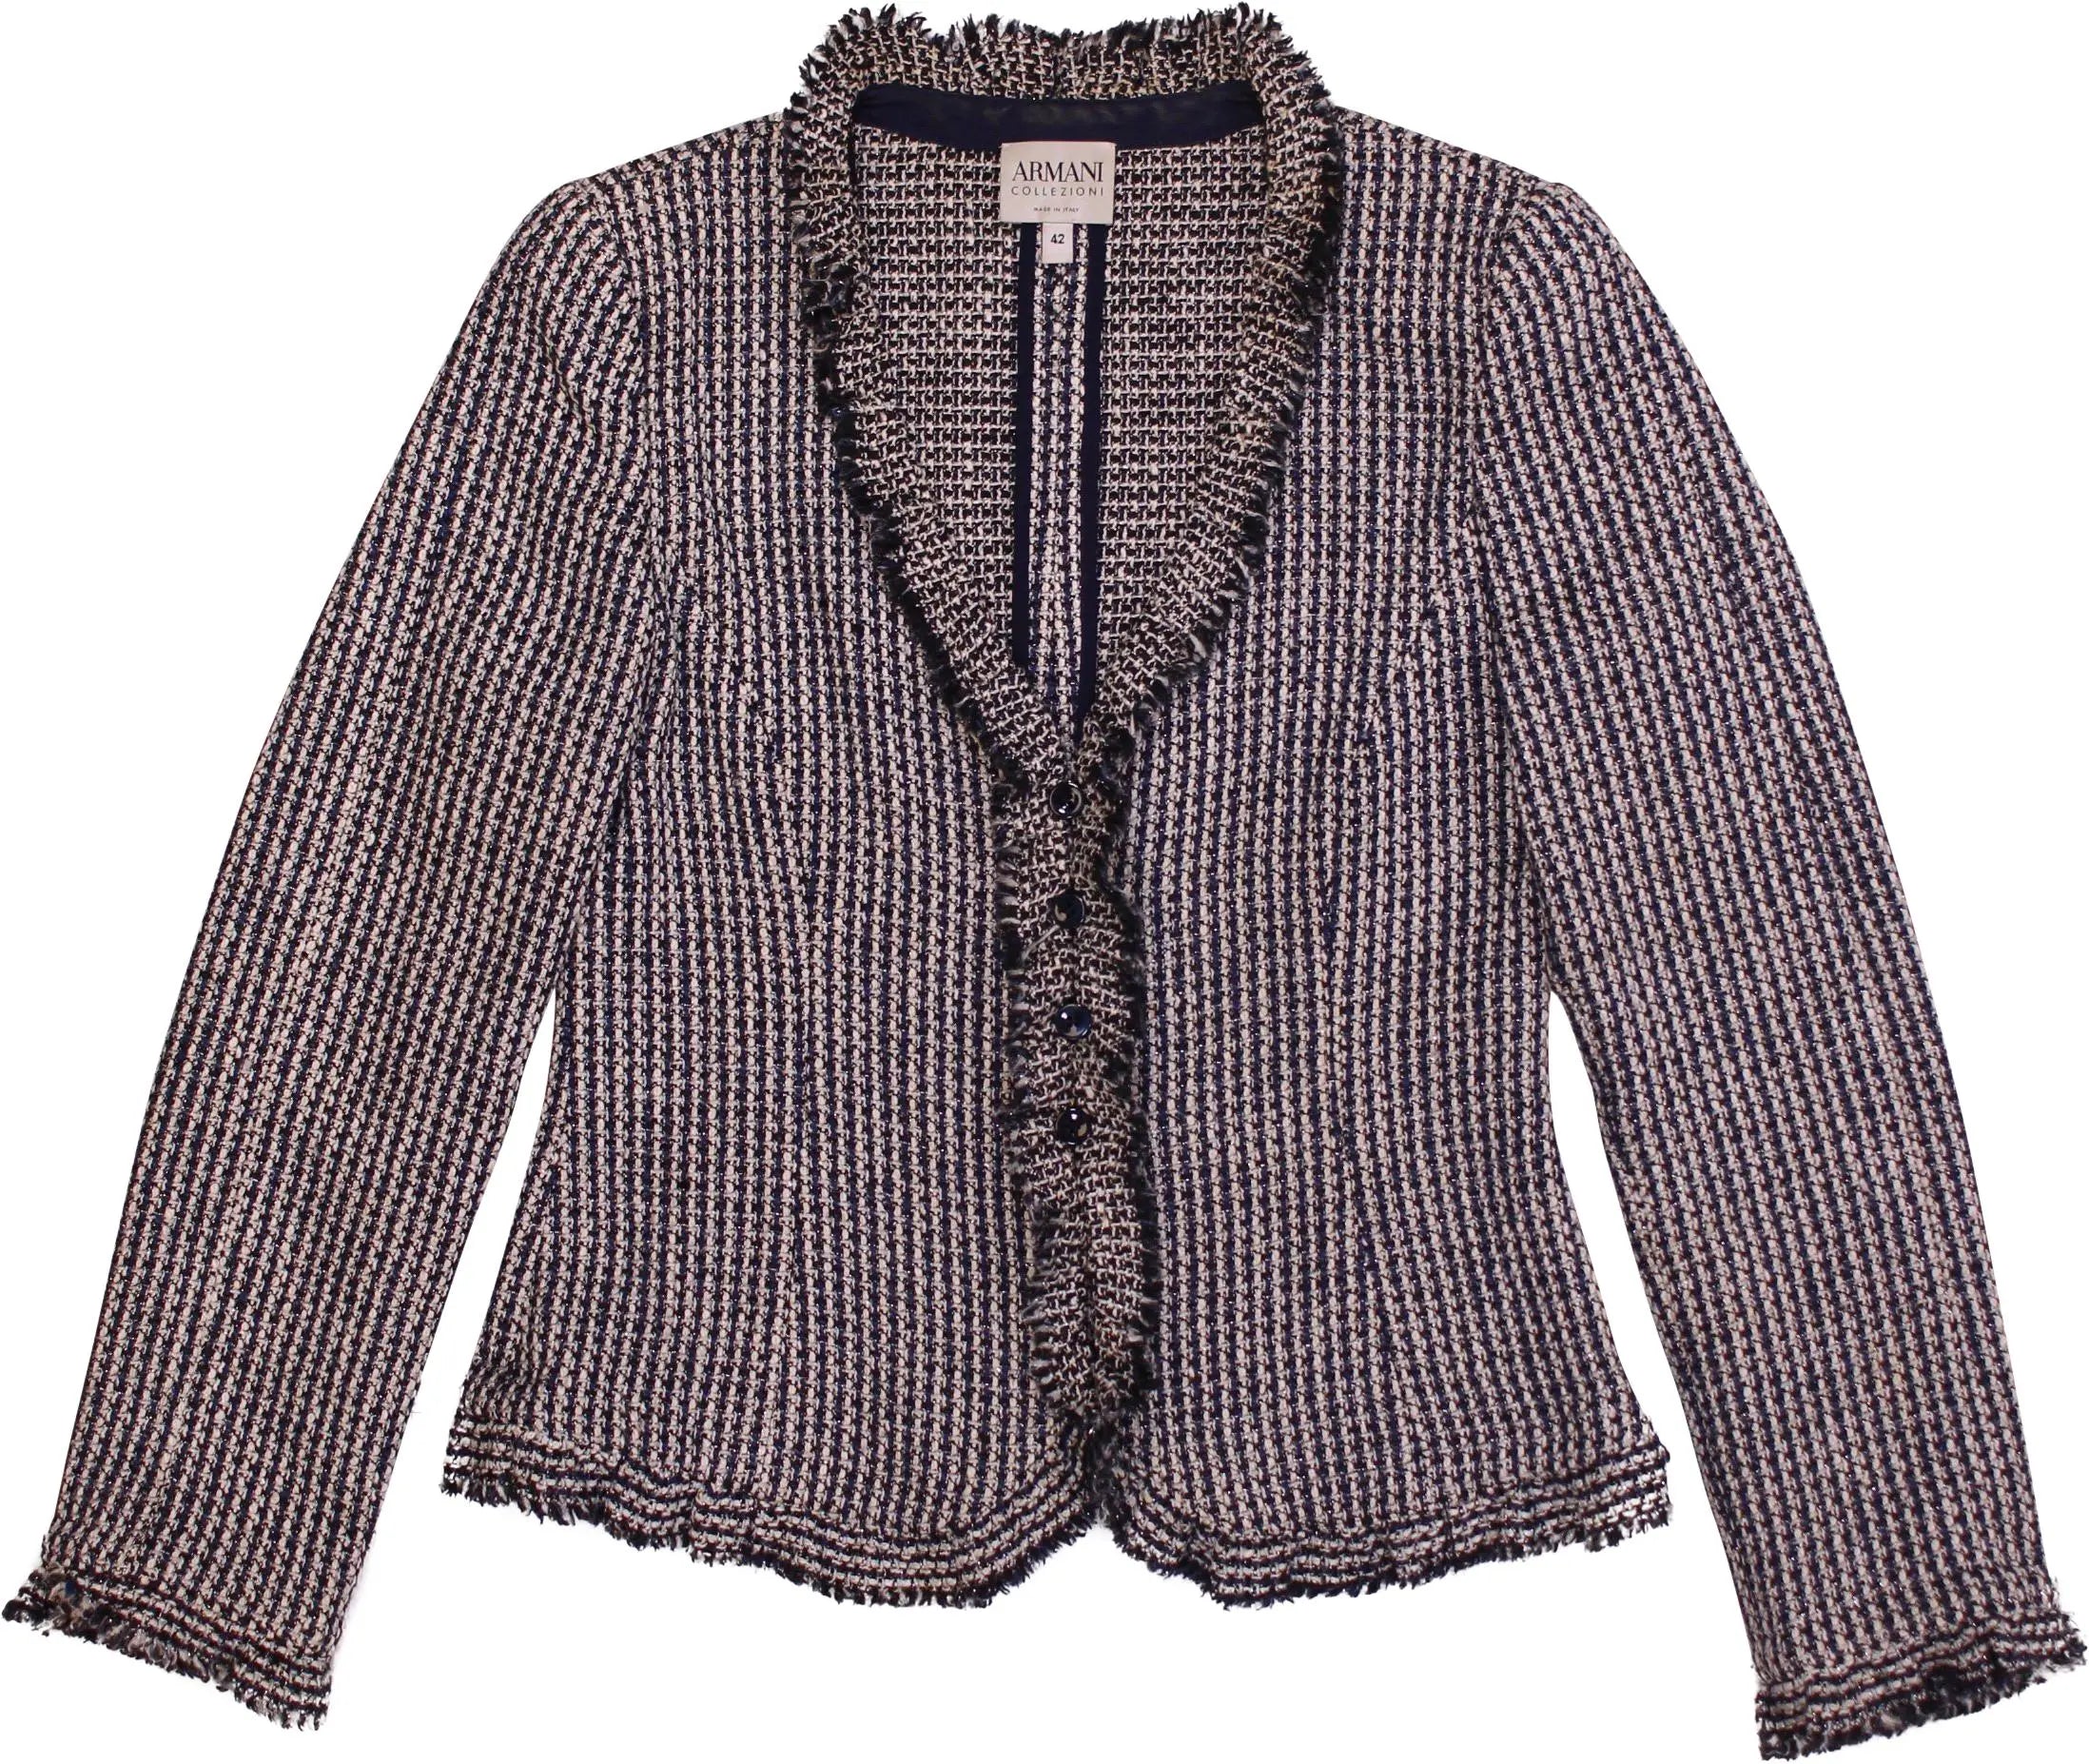 Armani Collezioni - Tweed Blazer by Armani Collezioni- ThriftTale.com - Vintage and second handclothing